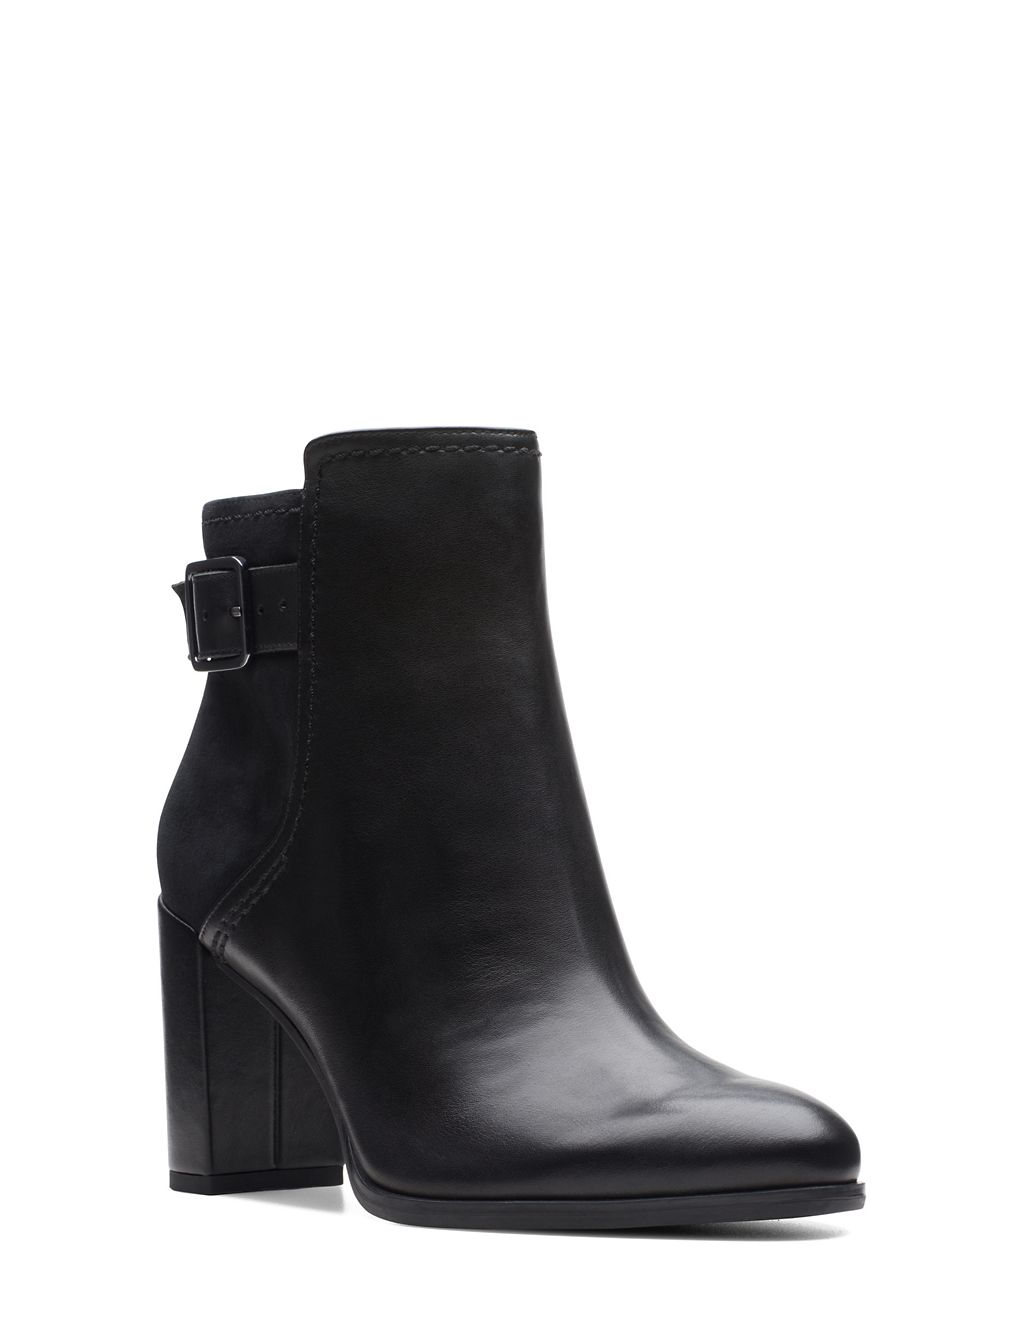 Leather Buckle Block Heel Ankle Boots 1 of 7